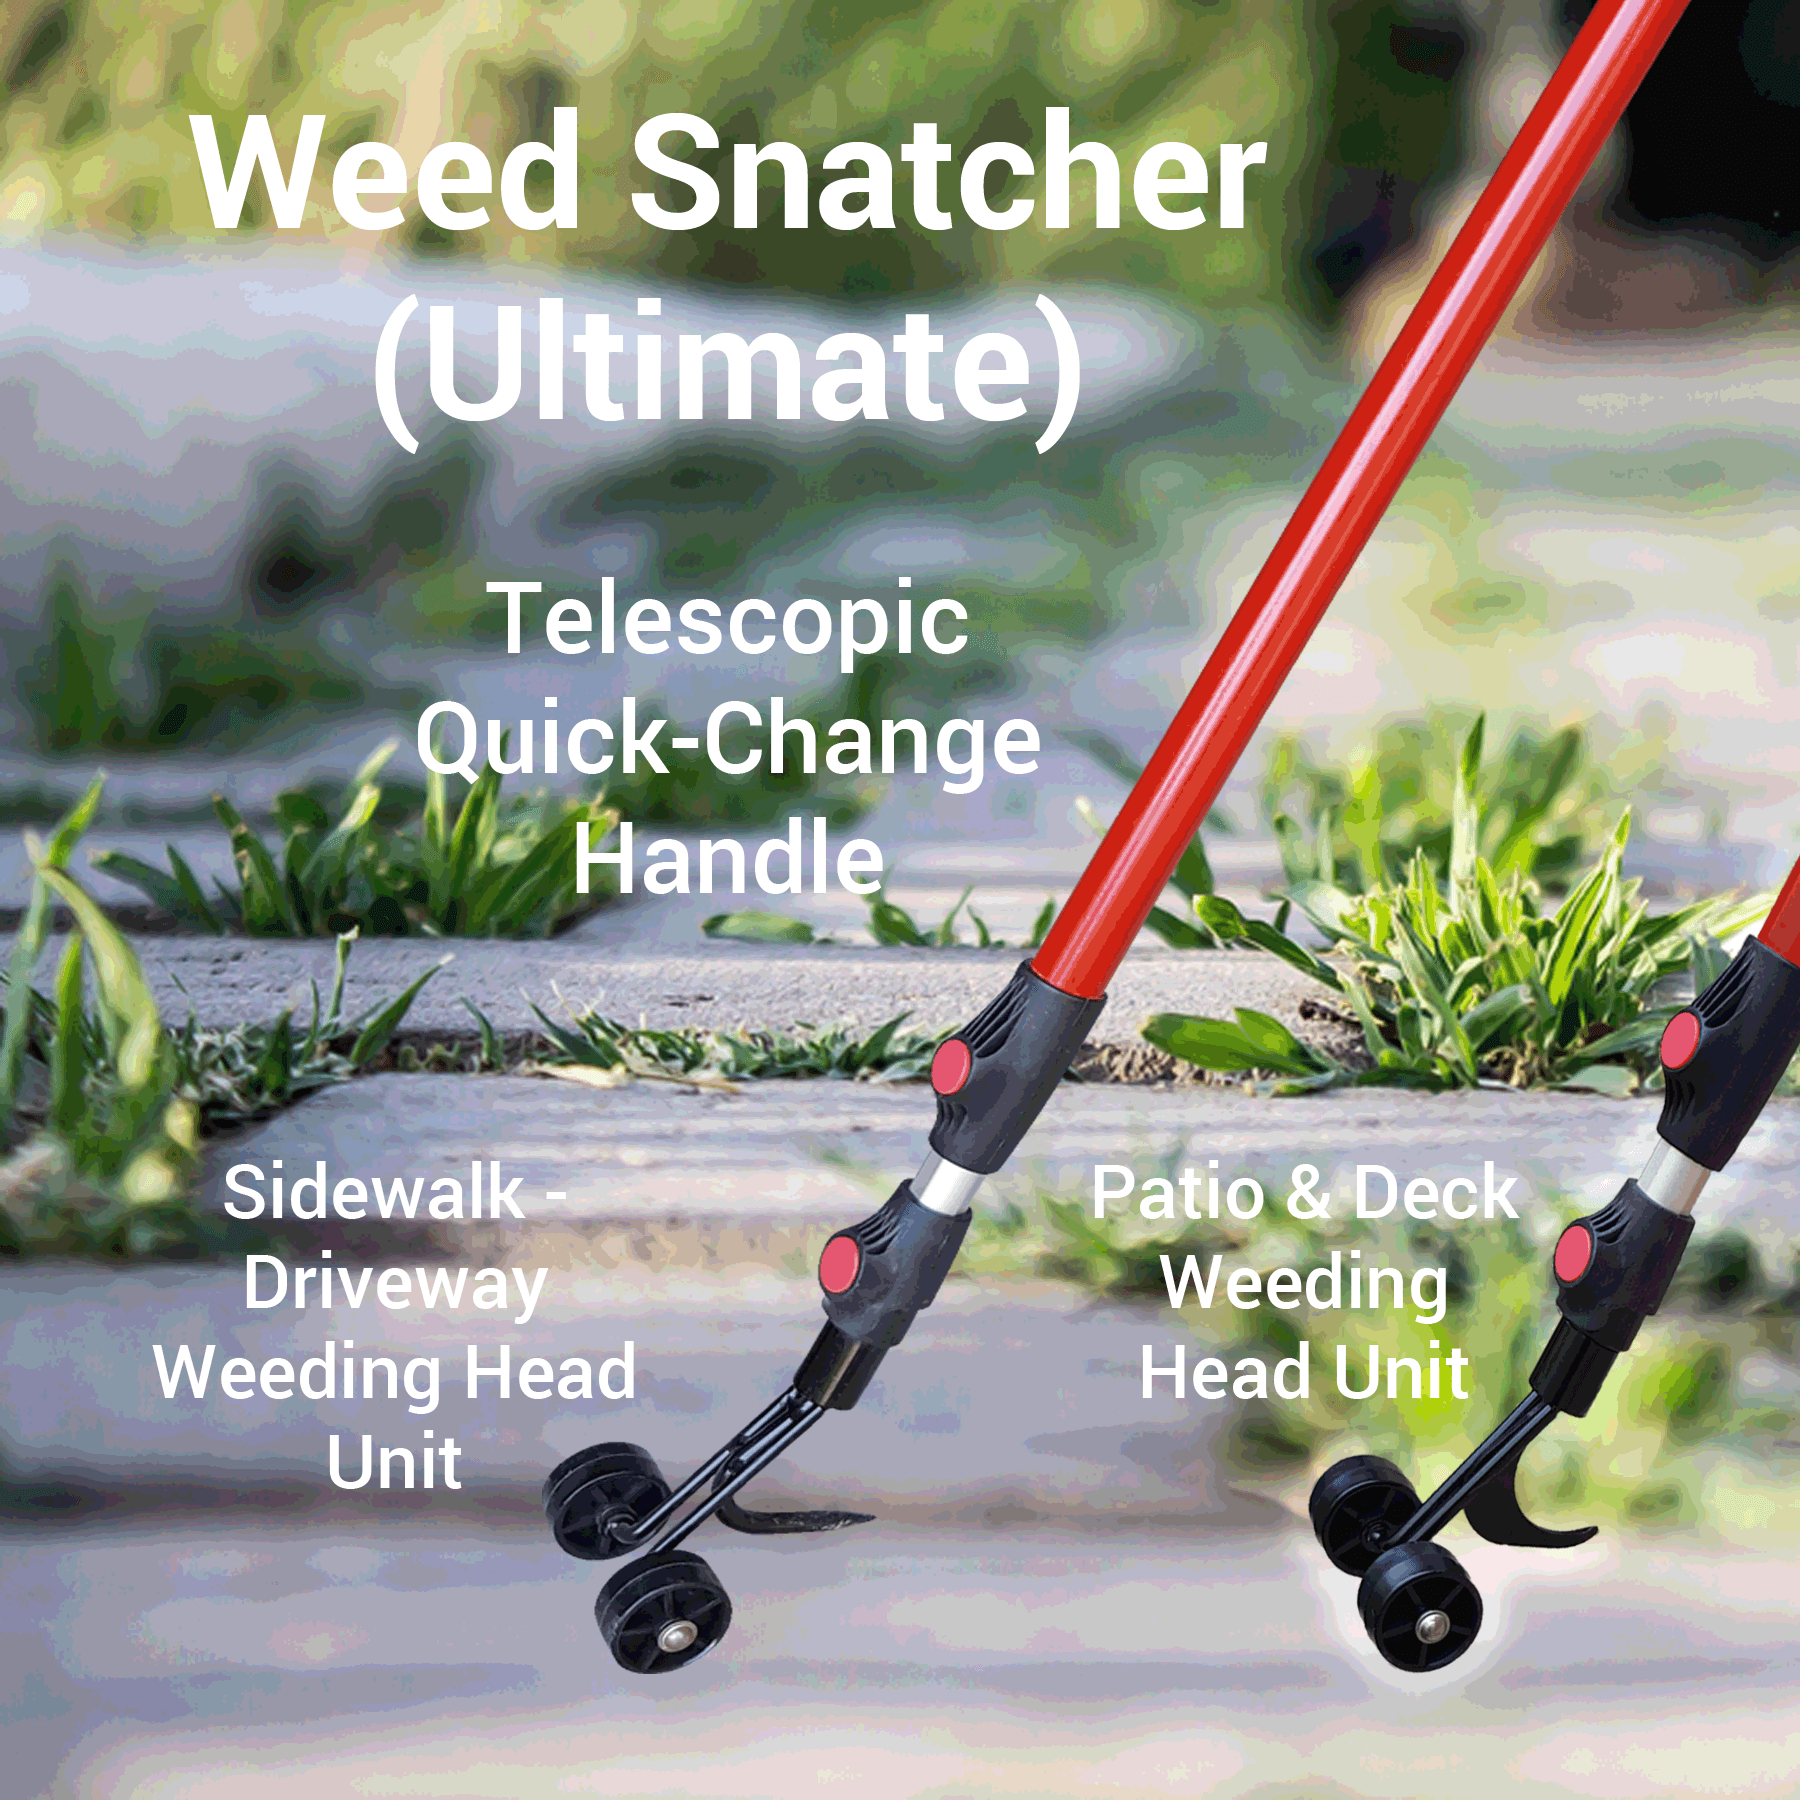 Weed Snatcher Patios Standard Ruppert Garden Tools Crack and Crevice Weeder and Lawn Edger for Weeding Driveways Stand-Up Telescoping 6ft Weed Remover Sidewalks Yard Pathways Brick and More 